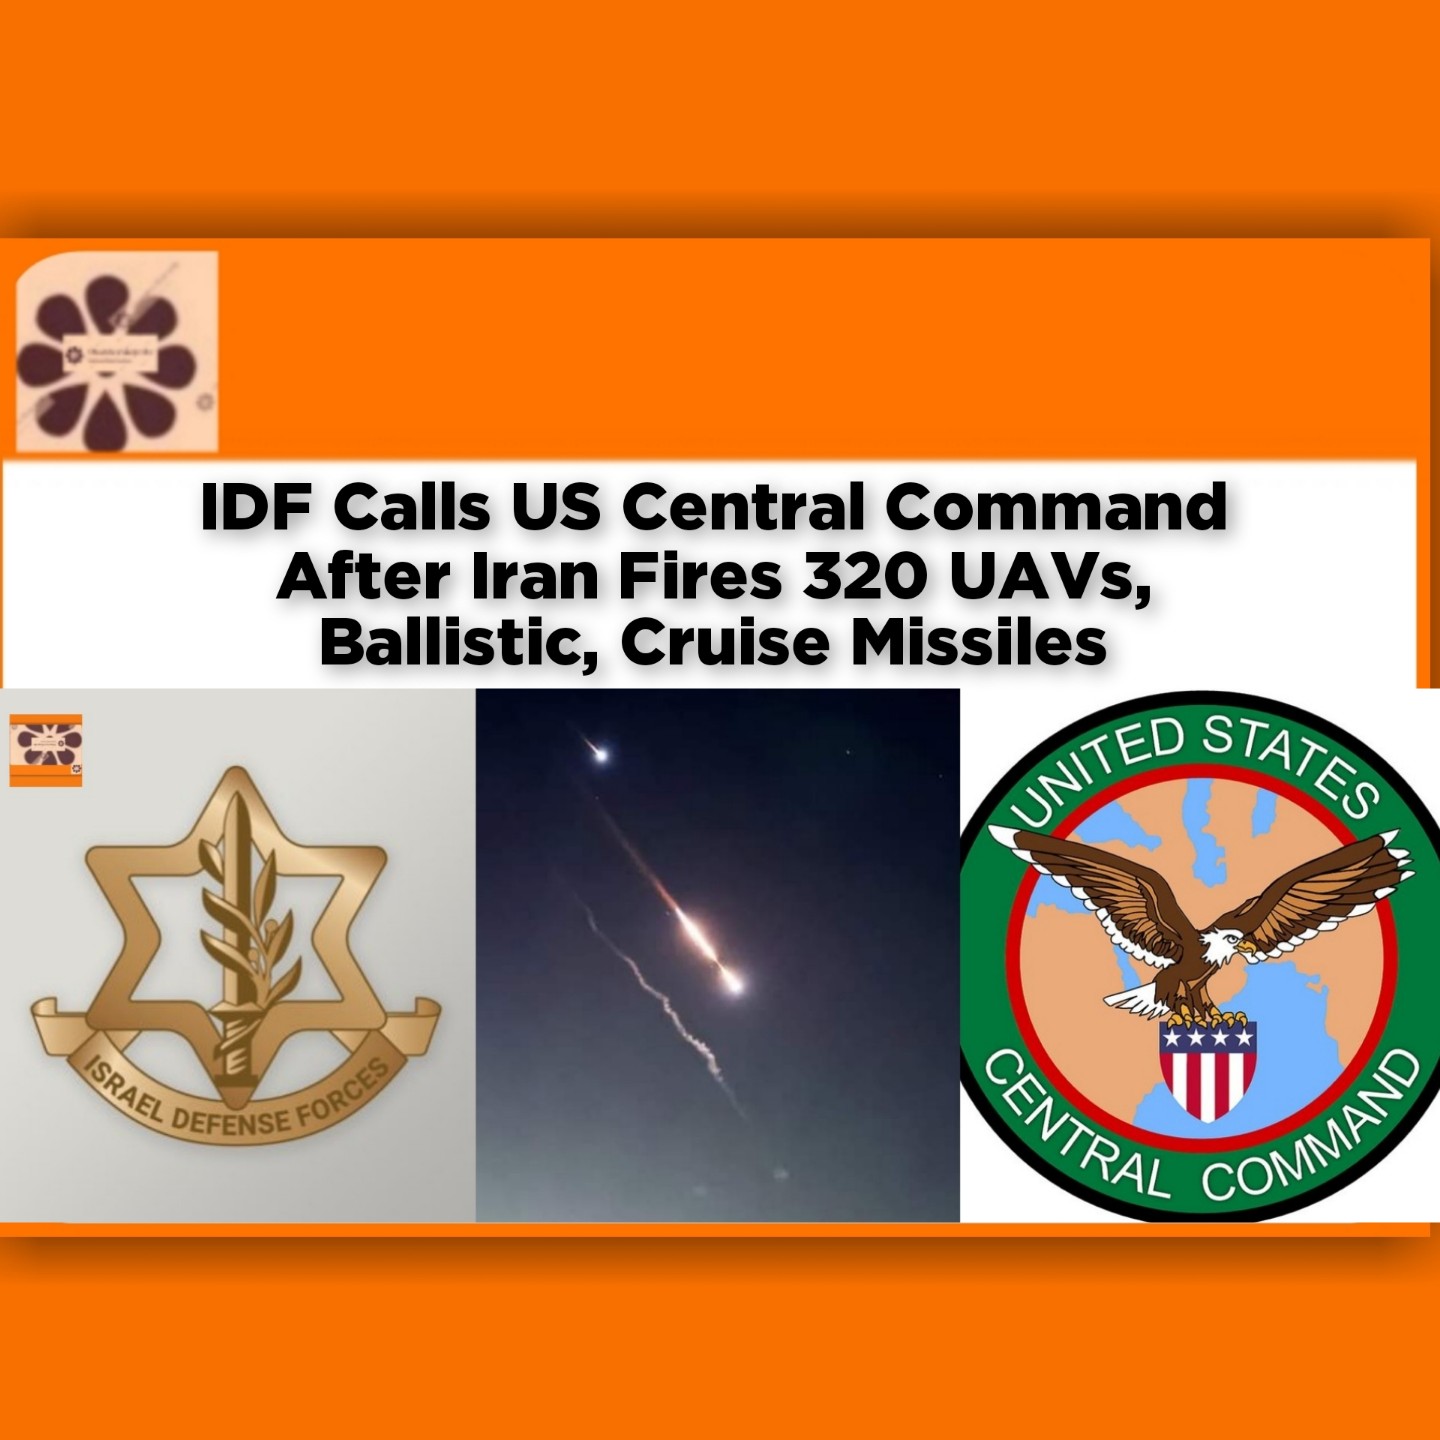 IDF Calls US Central Command After Iran Fires 320 UAVs, Ballistic, Cruise Missiles ~ OsazuwaAkonedo #concealed